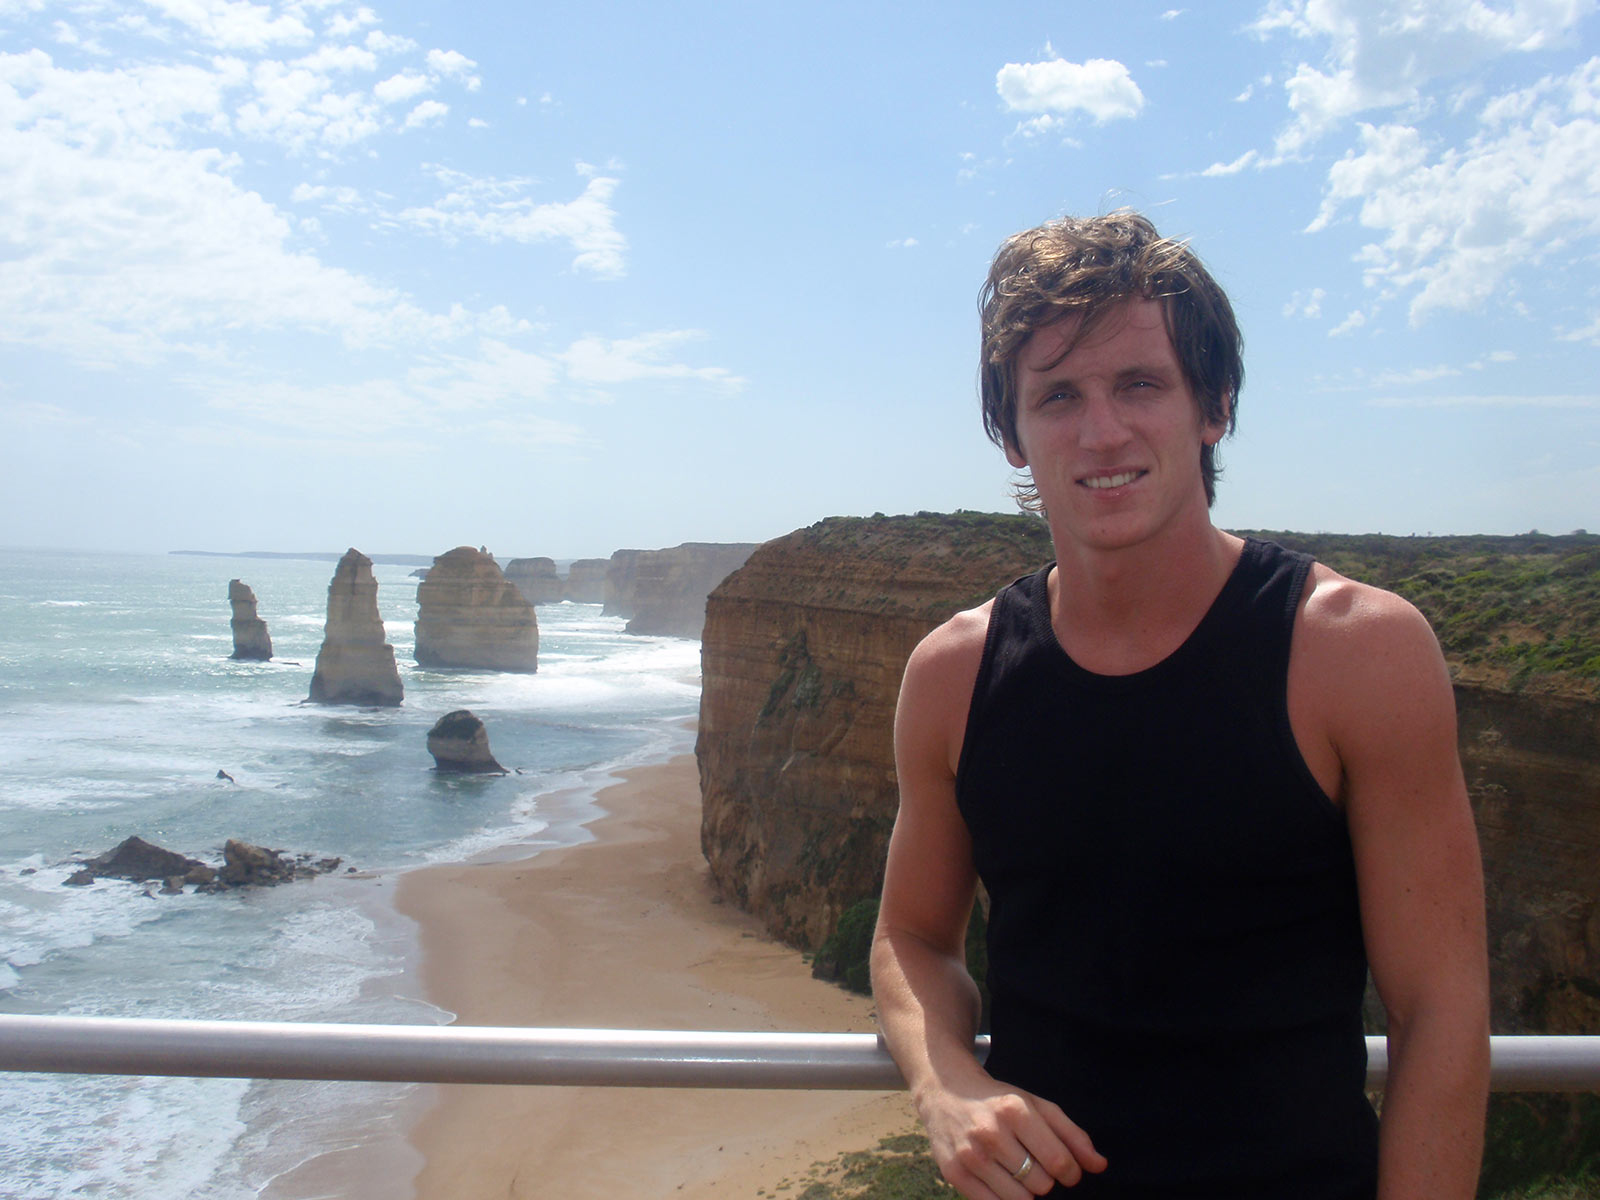 The 12 Apostles during our trip to the desert in Australia. Rescued in the middle of the desert